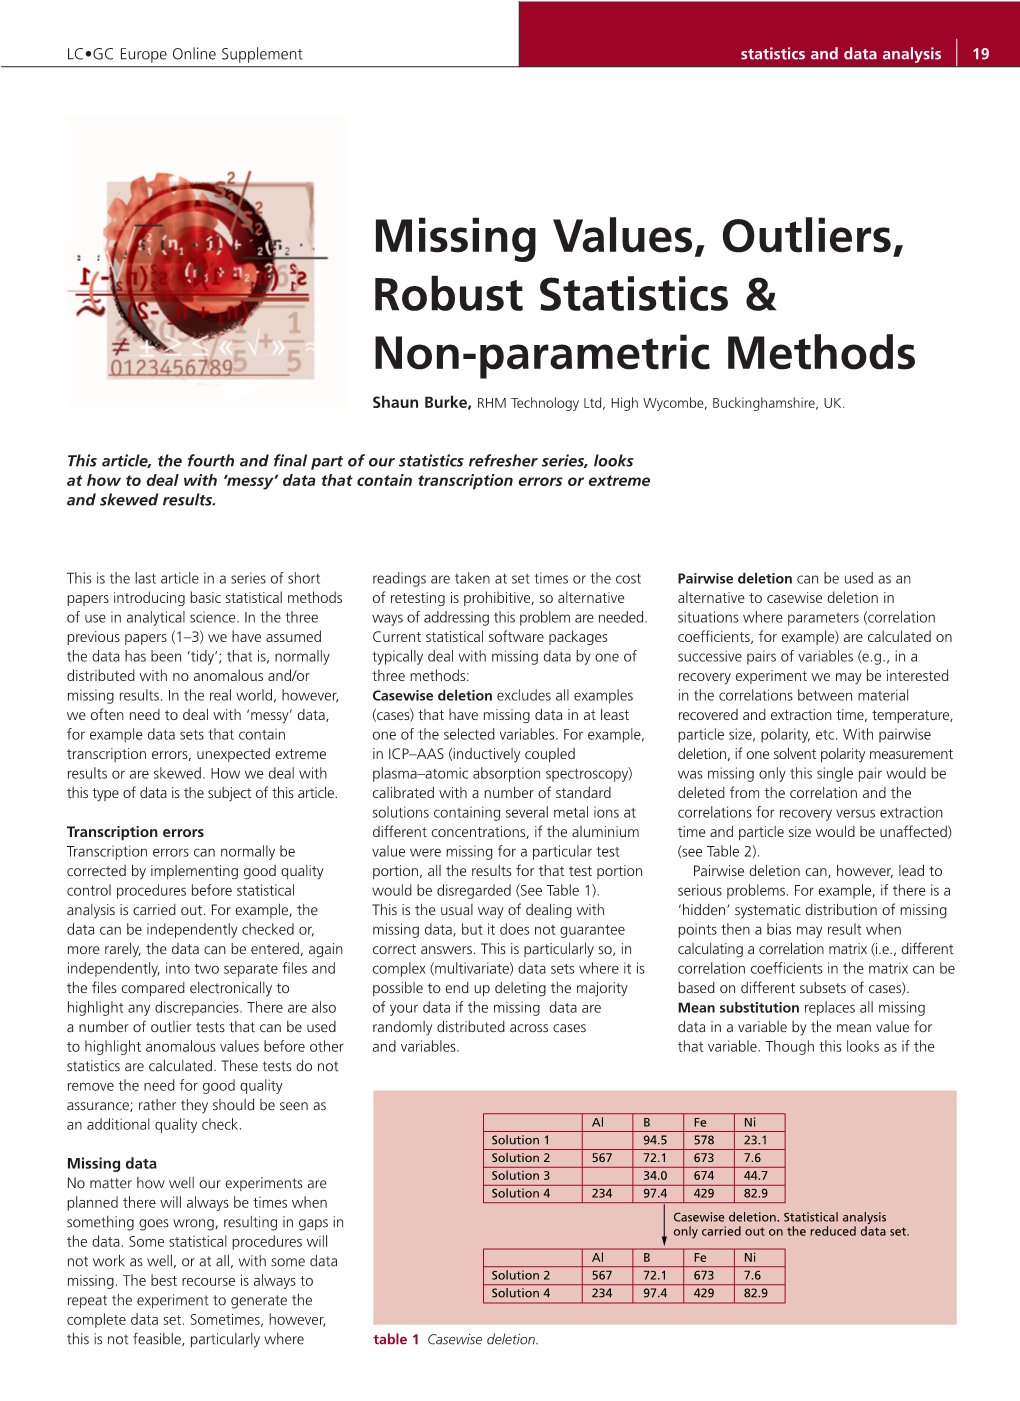 Missing Values, Outliers, Robust Statistics & Non-Parametric Methods